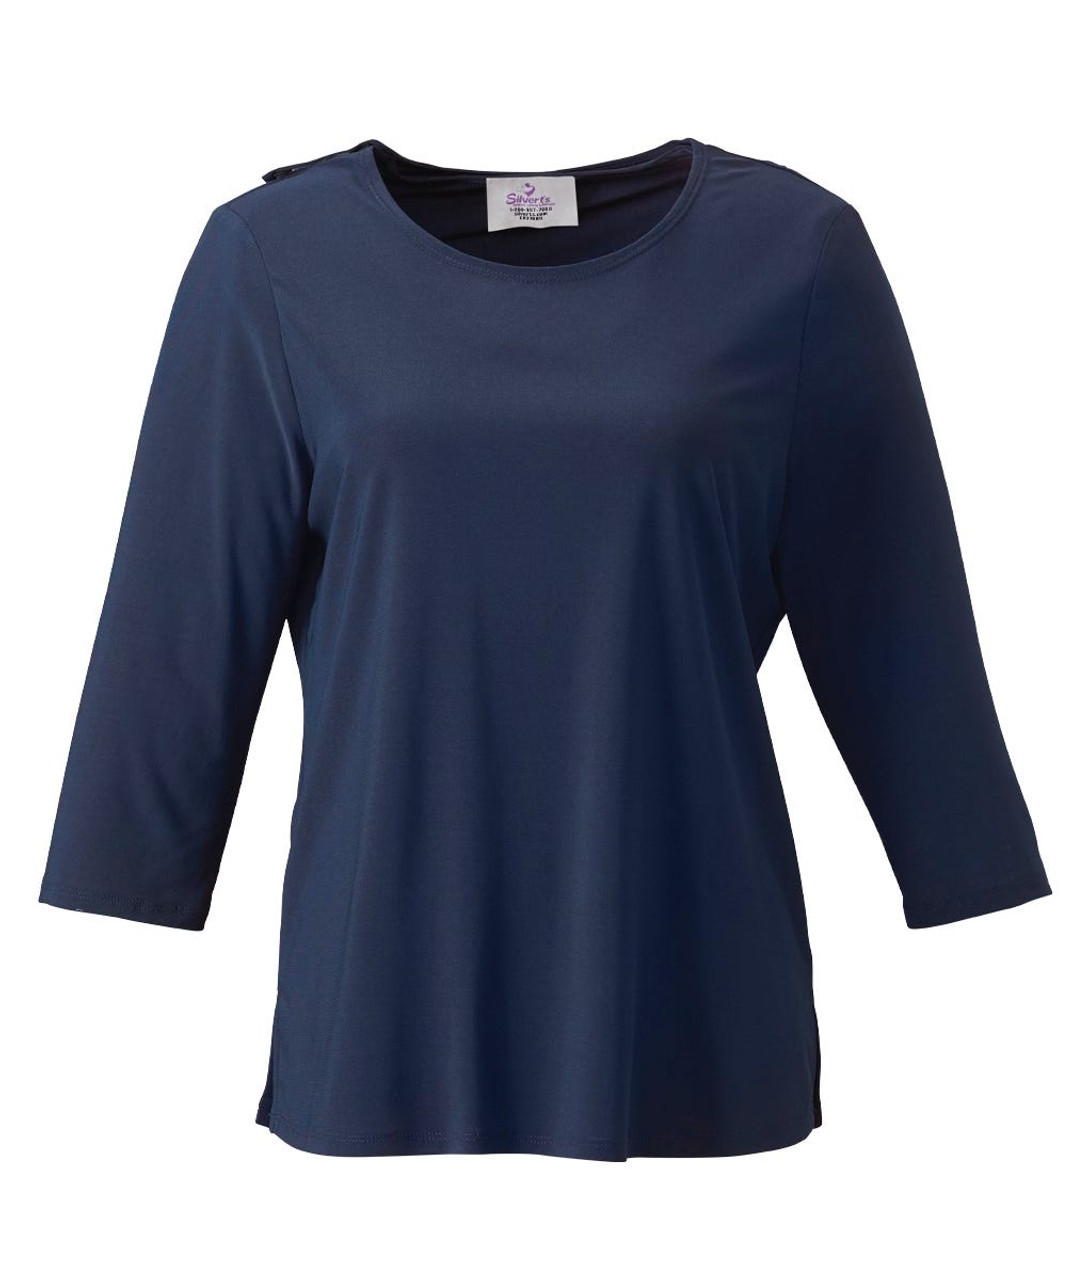 Silverts SV22620 Solid Color Open Back Top for Women Navy, Size=3XL, SV22620-SV3-3XL